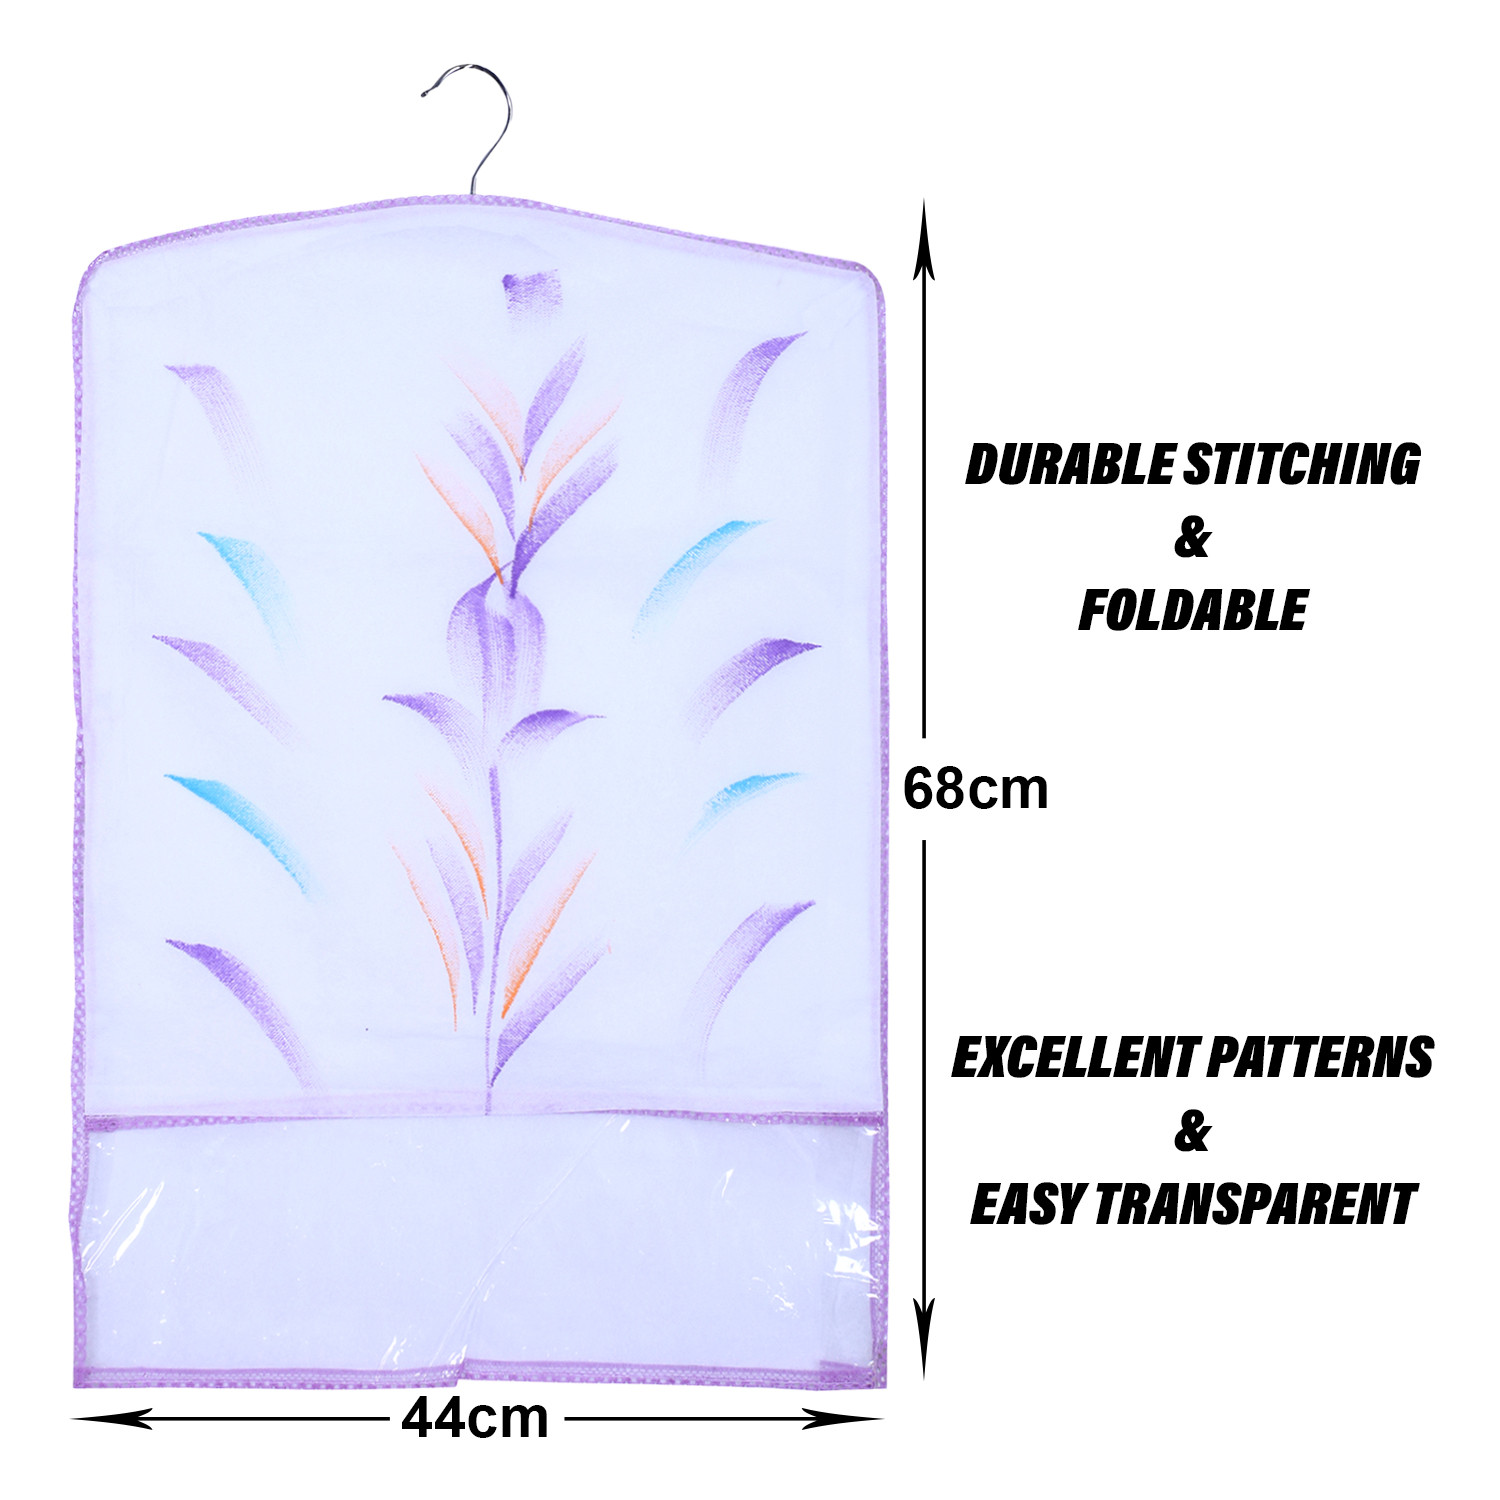 Kuber Industries Hanging Saree Cover | Brush Painting Pattern Saree Cover | Non-Woven Saree Covers for Home | Saree Cover with Small Transparent view |  Purple